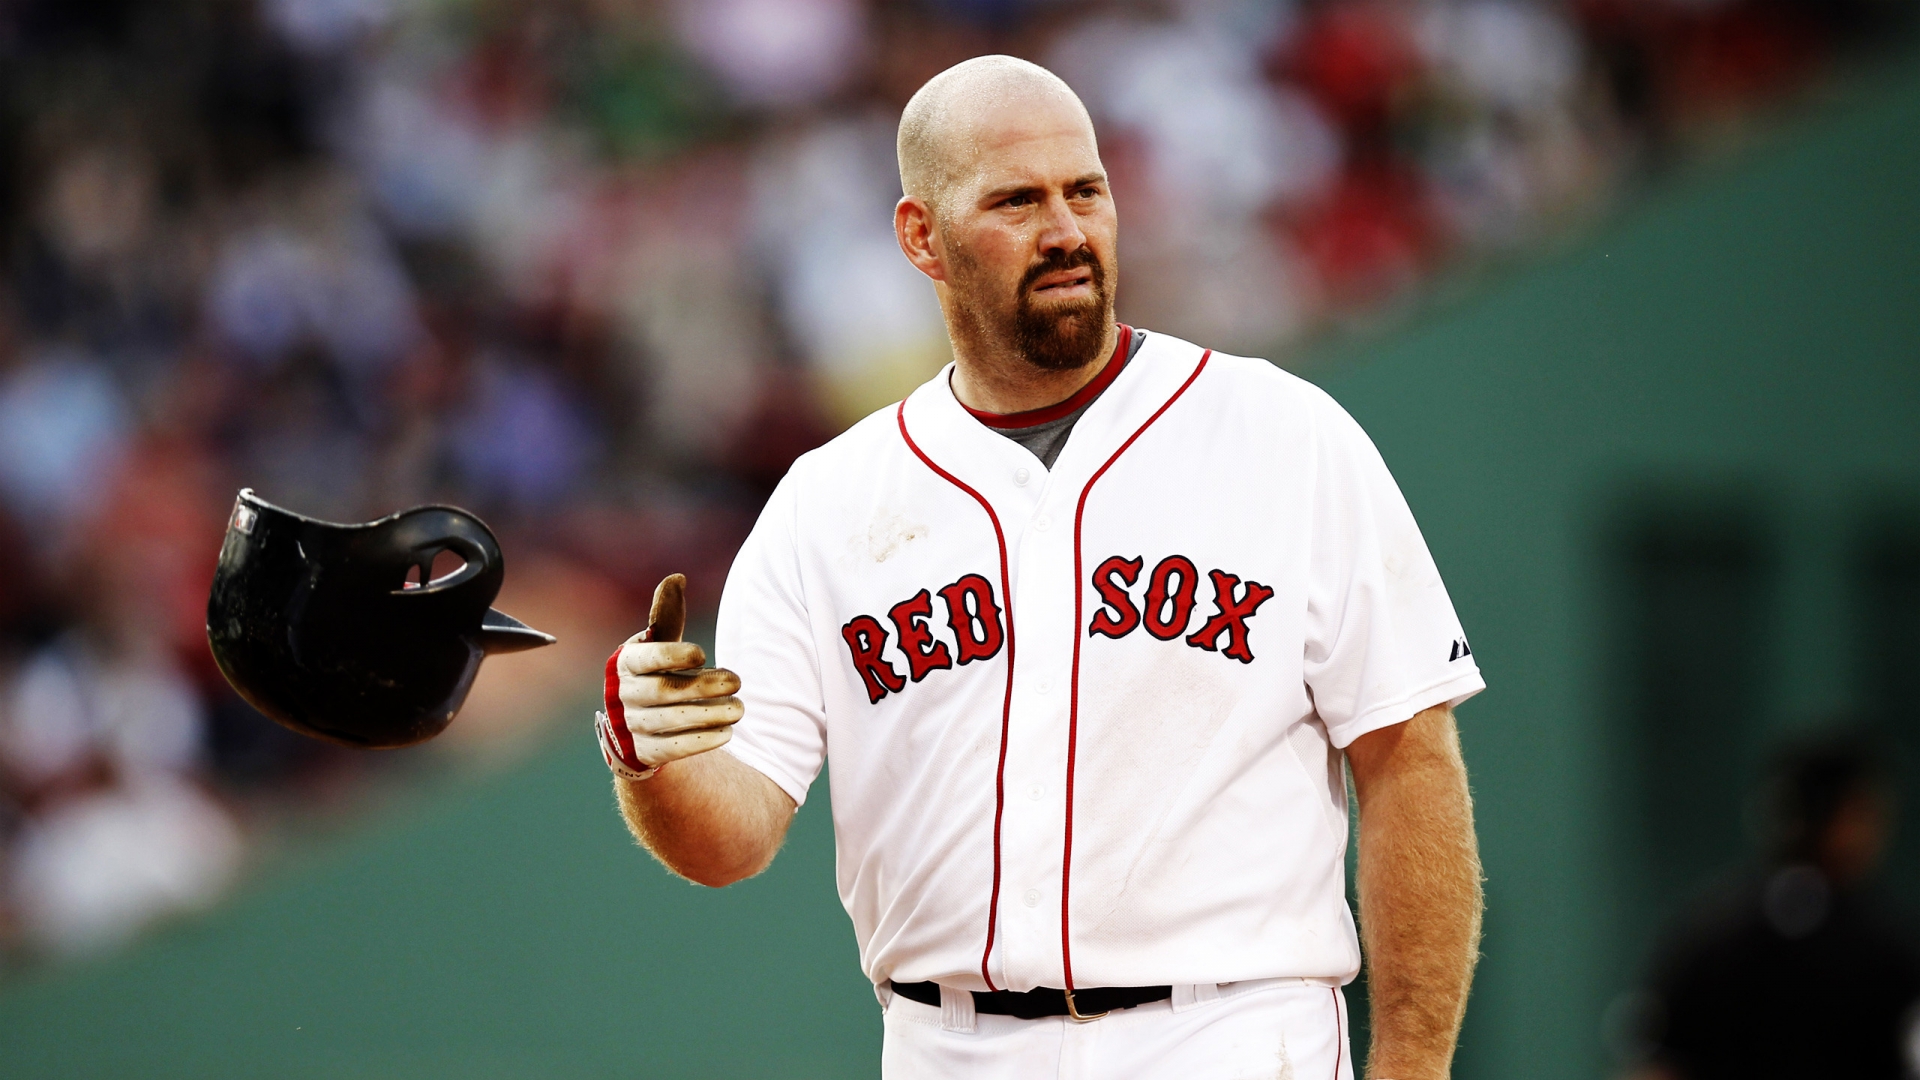 Kevin Youkilis for 1920 x 1080 HDTV 1080p resolution